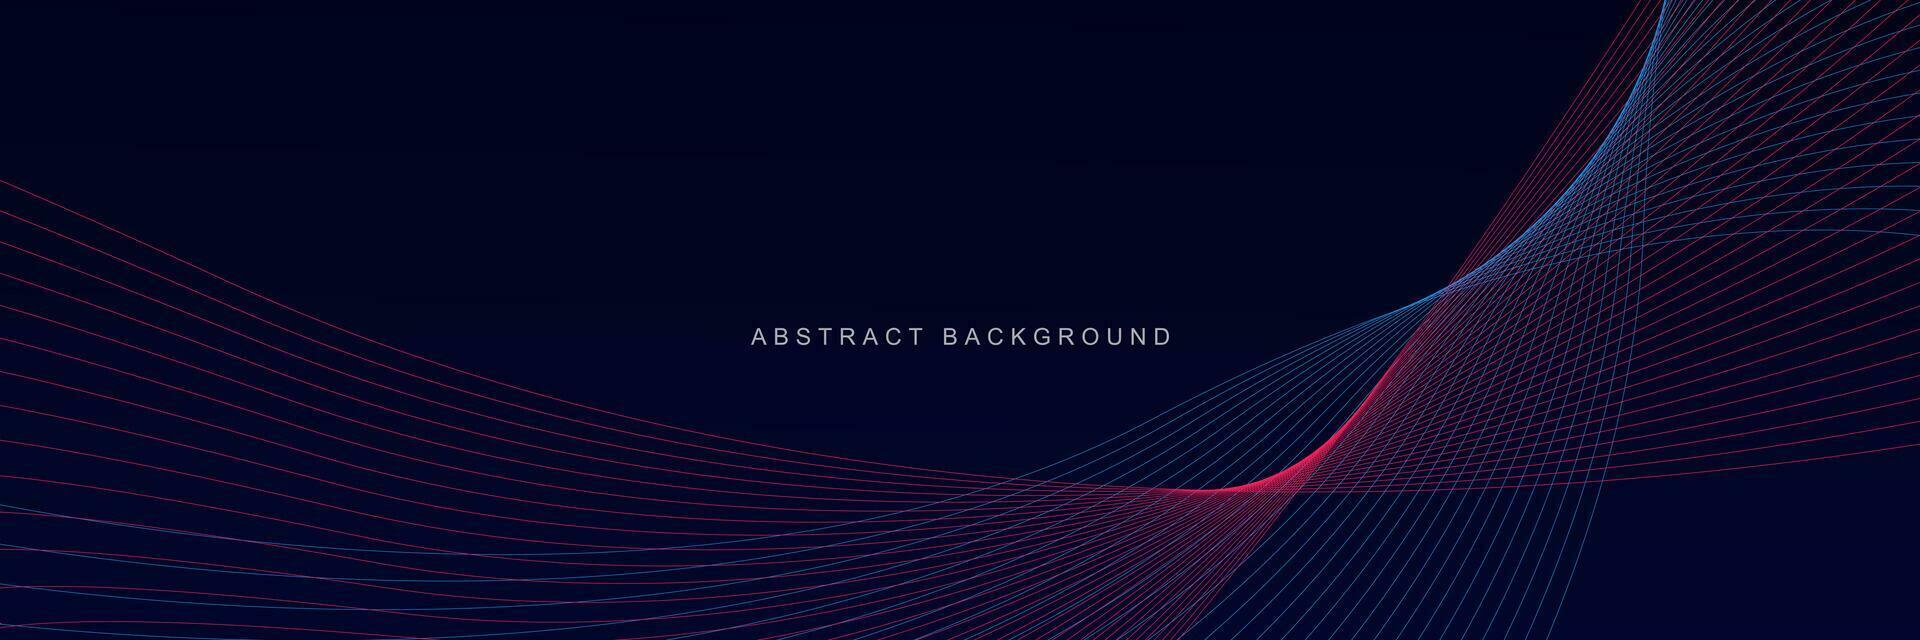 Dark Blue abstract background with glowing waves. Shiny lines design element. Modern pink blue gradient flowing wave lines. Futuristic technology concept. Vector illustration